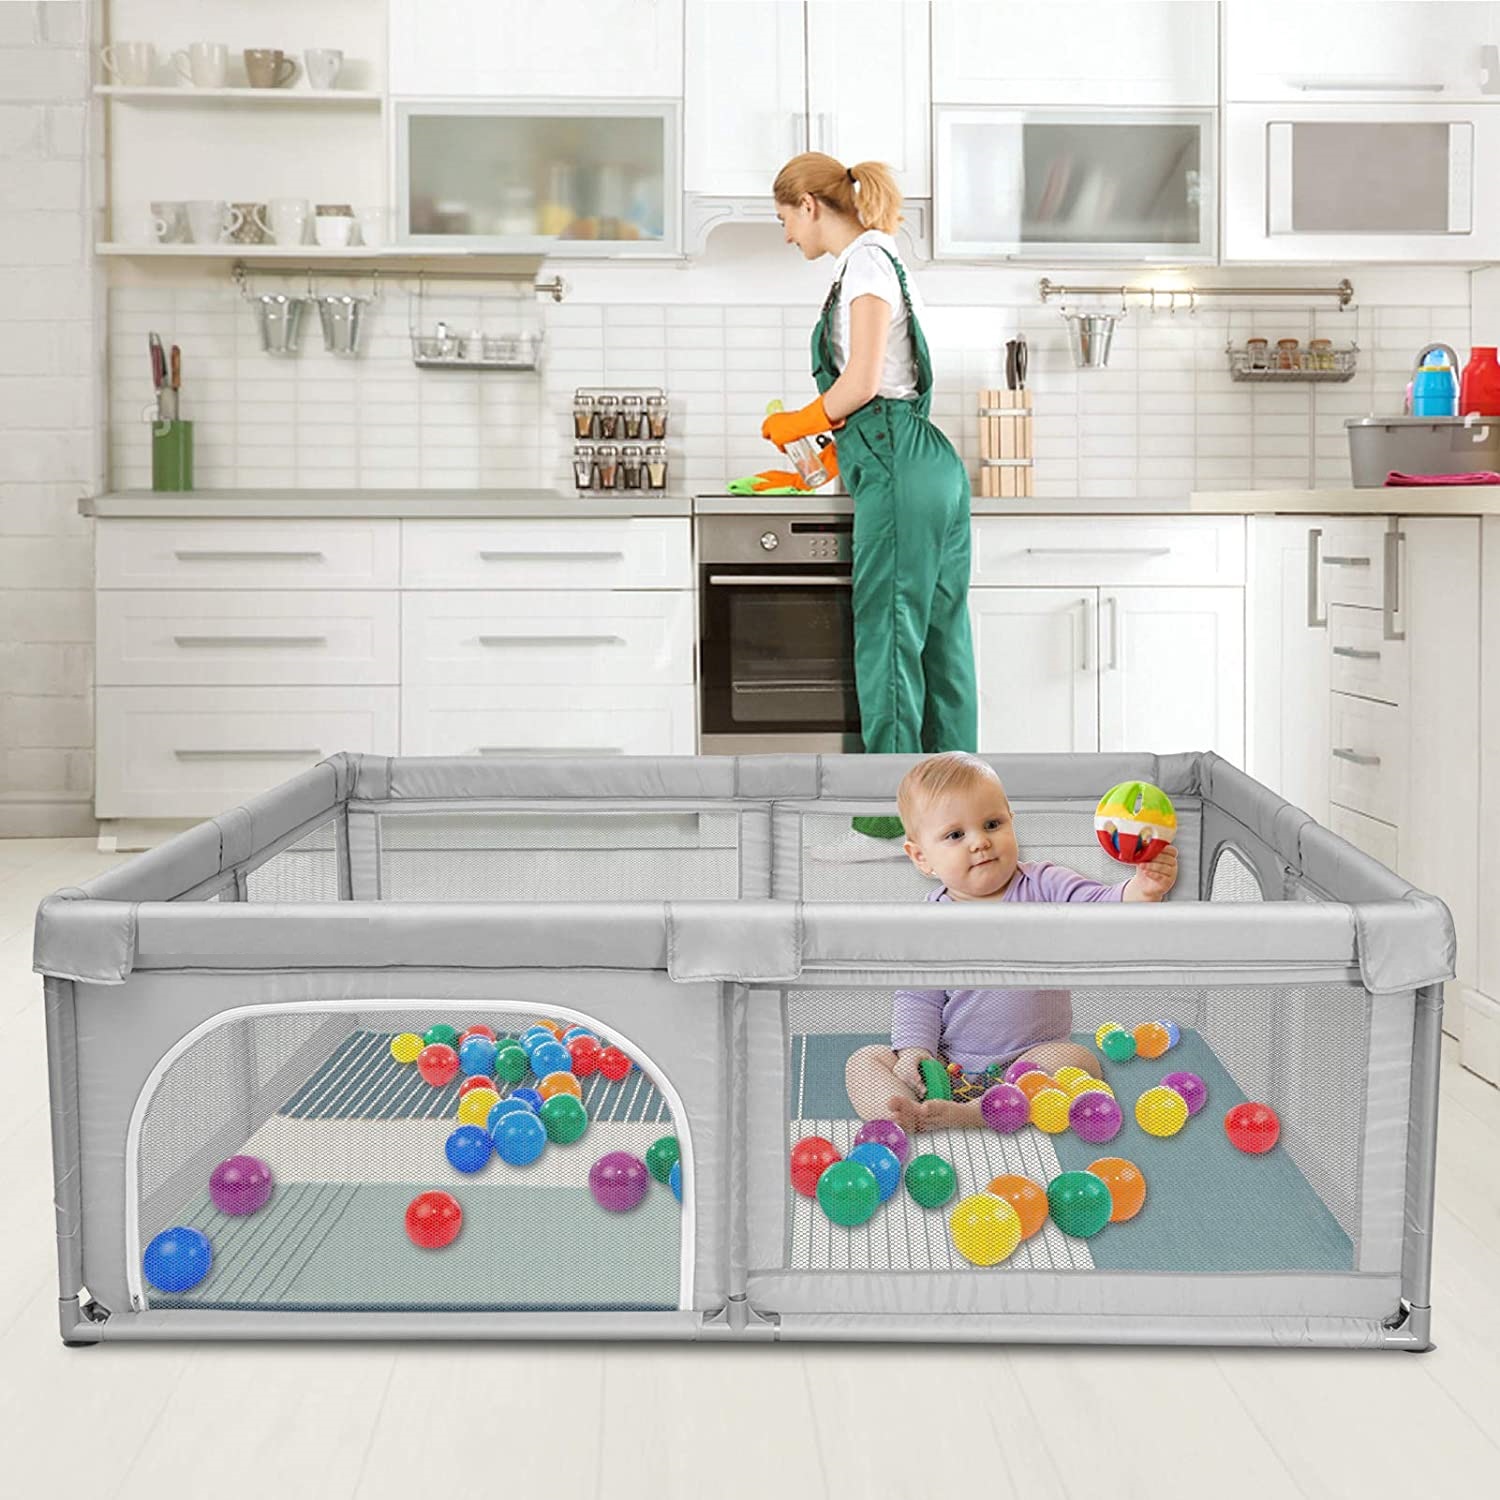 Bioby Baby Playpen 360° Wide View Children Playpen Baby Playground Safety Fence Anti-collosion Children Baby Ball Pool Activity Play Pen